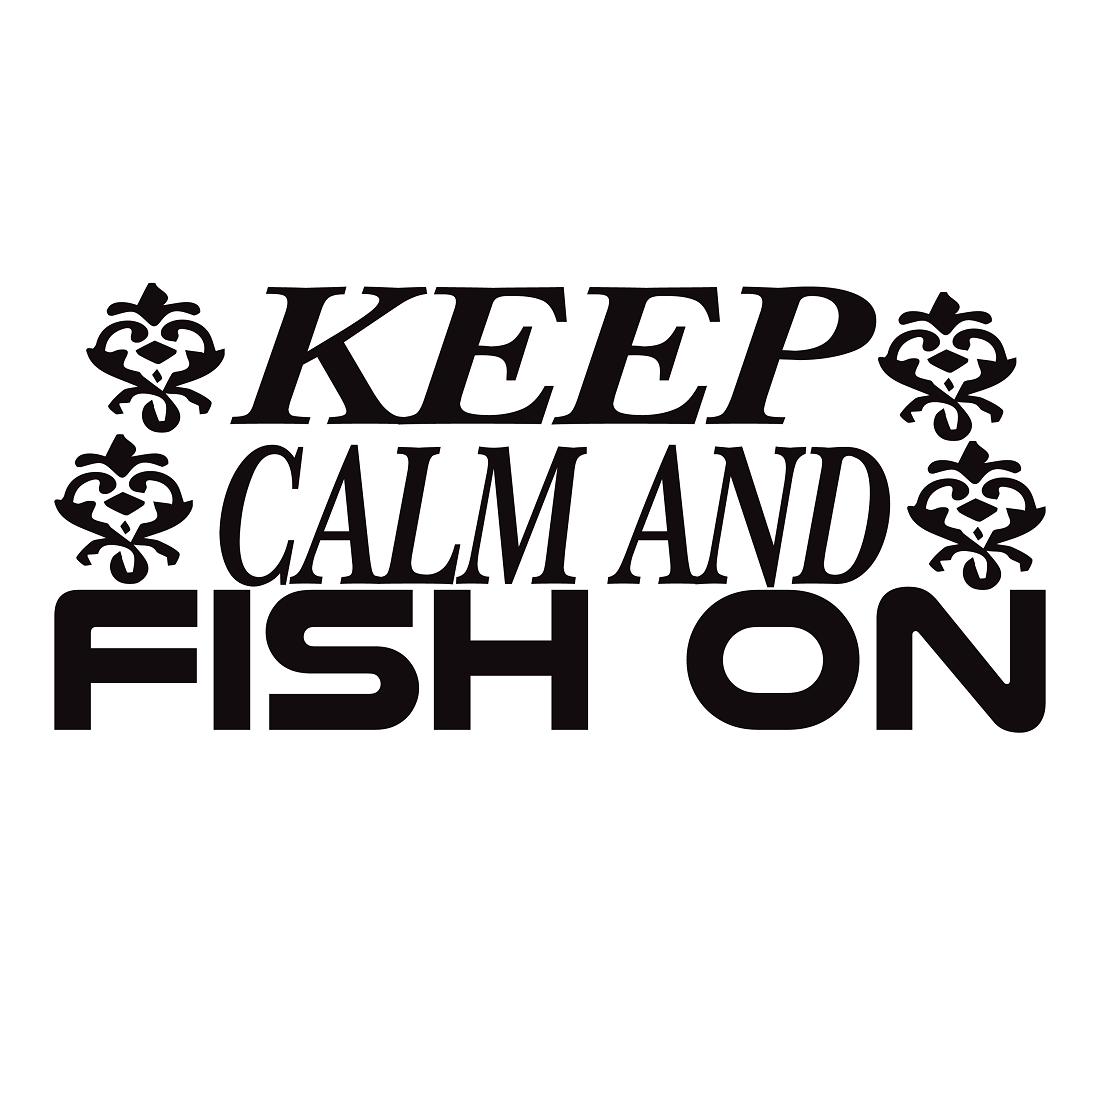 Keep calm and fish on preview image.